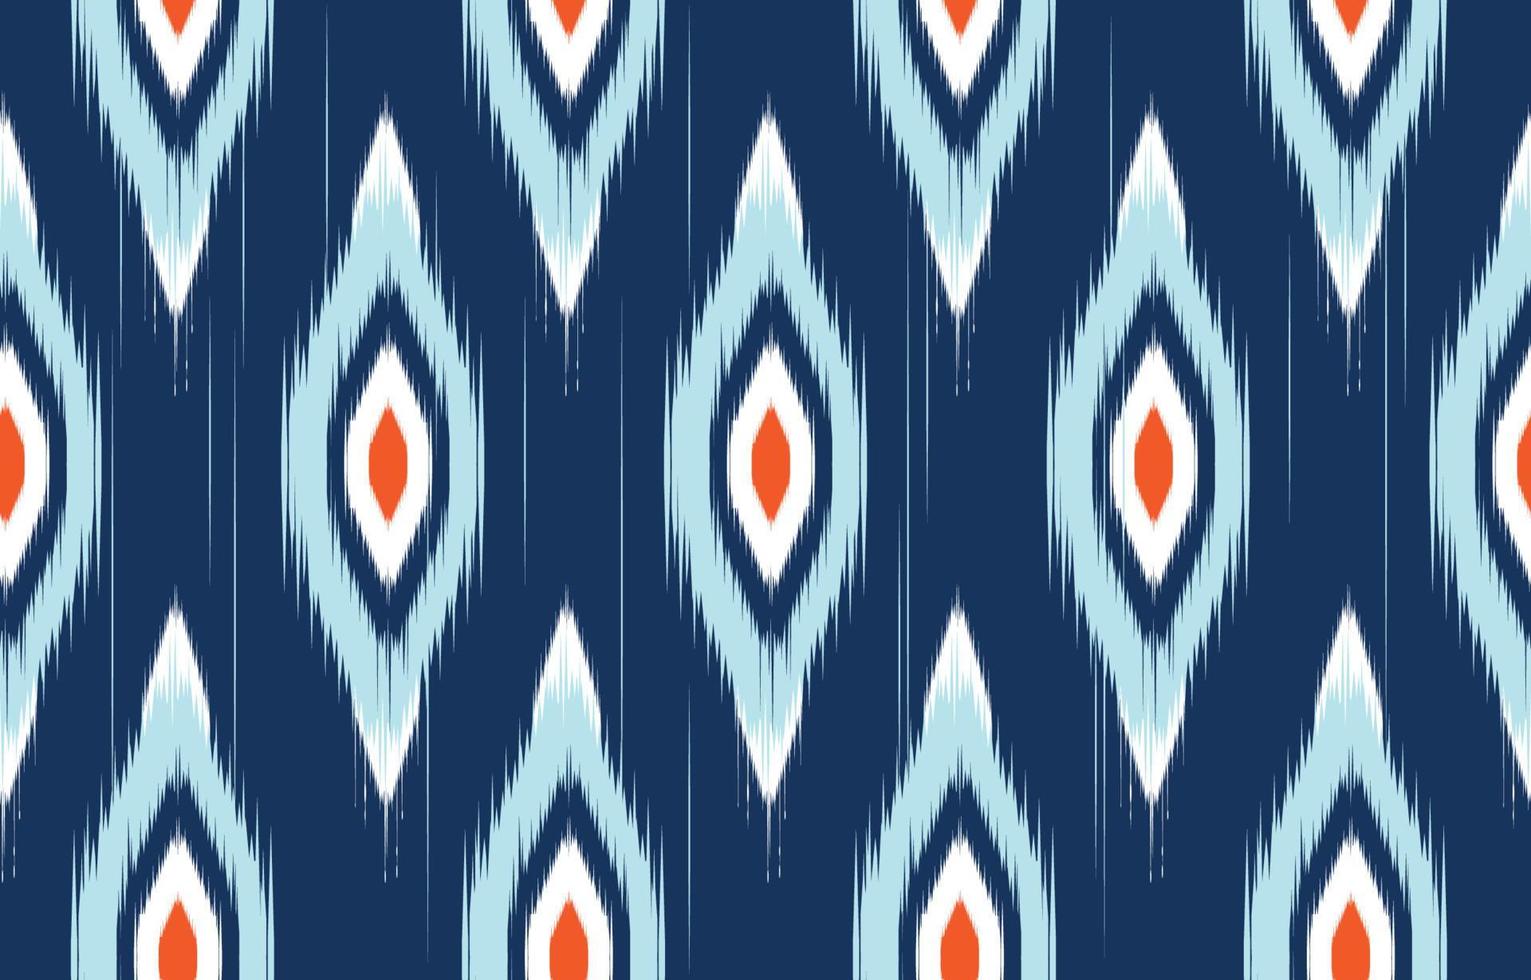 Ethnic abstract blue background. Seamless pattern in tribal, folk embroidery, and Mexican style. Aztec geometric art ornament print.Design for carpet, wallpaper, clothing, wrapping, fabric, cover vector